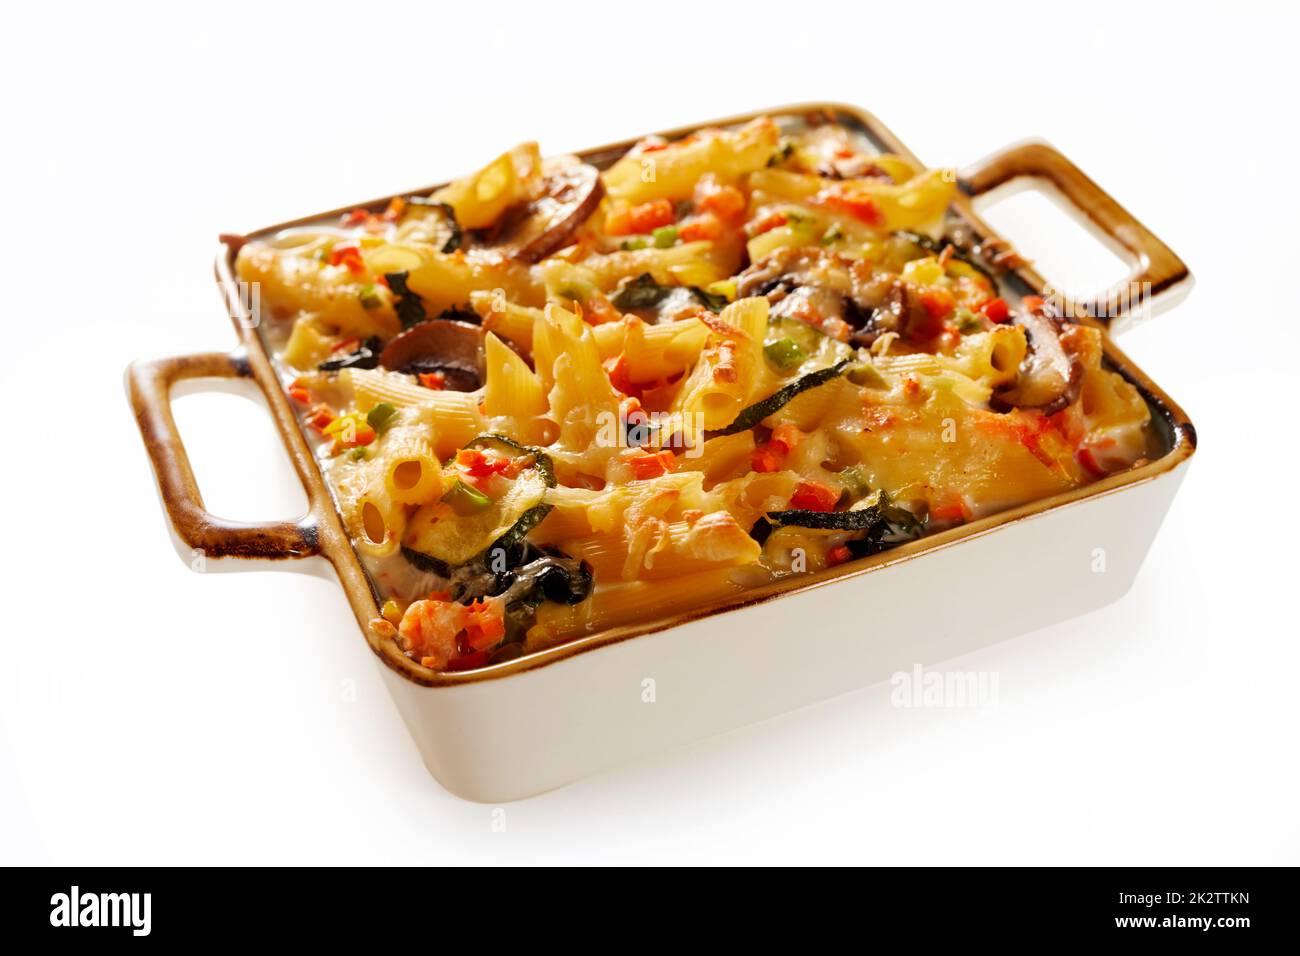 Delicious baked penne served on white table Stock Photo